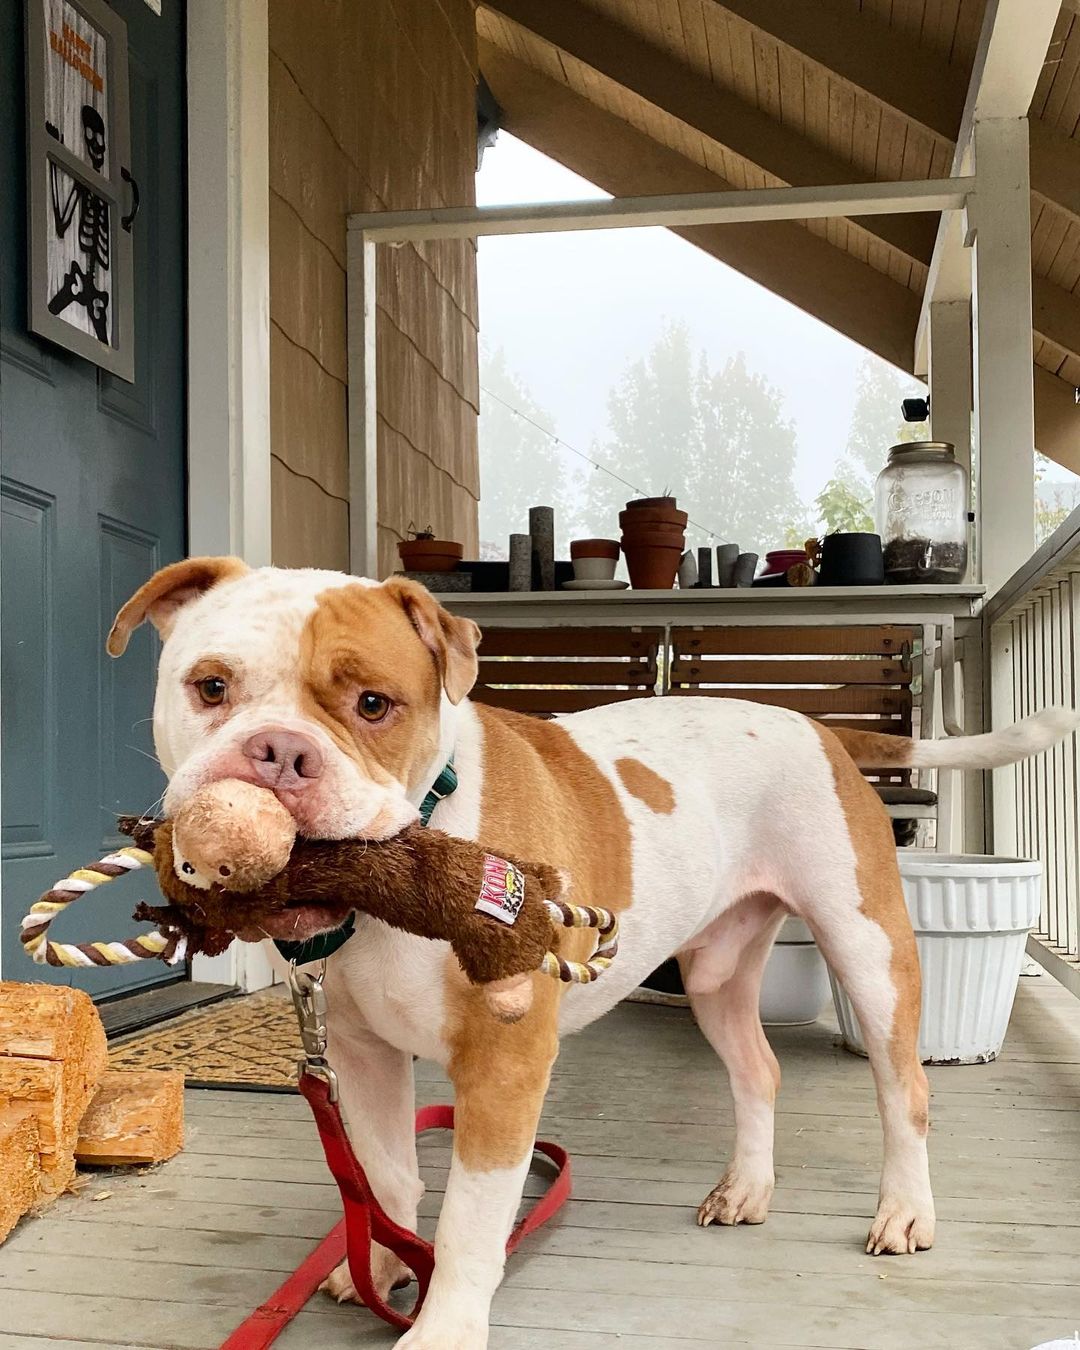 dog with toy in his mouth on porch